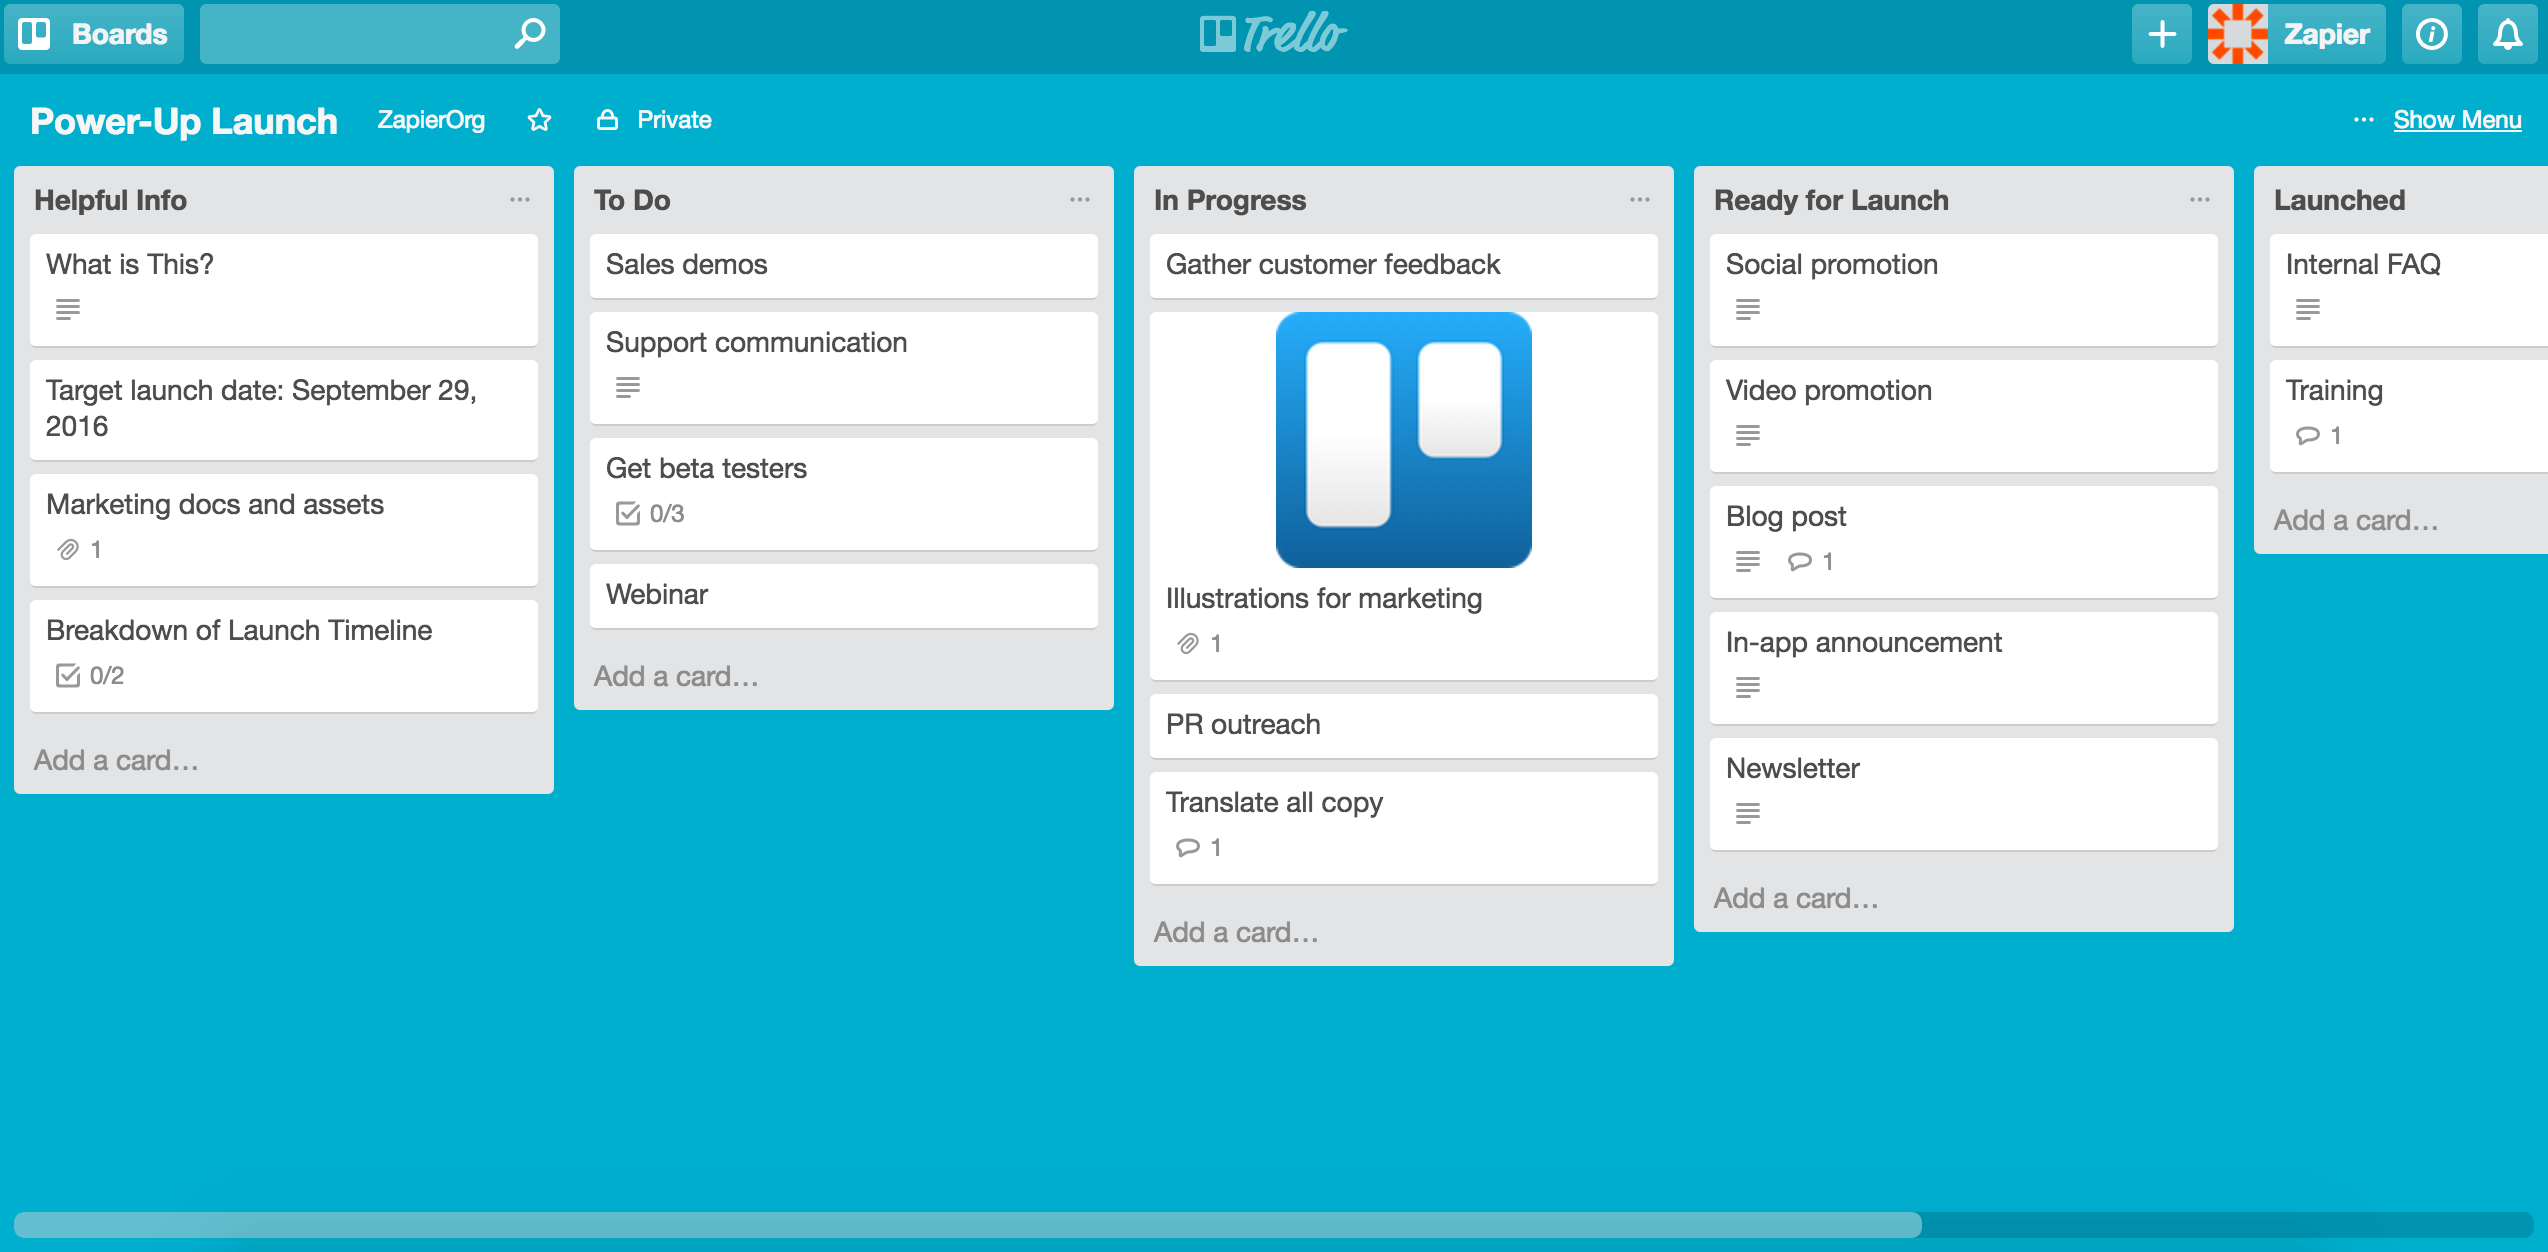 This is actually a short article or even picture approximately the How The Trello...